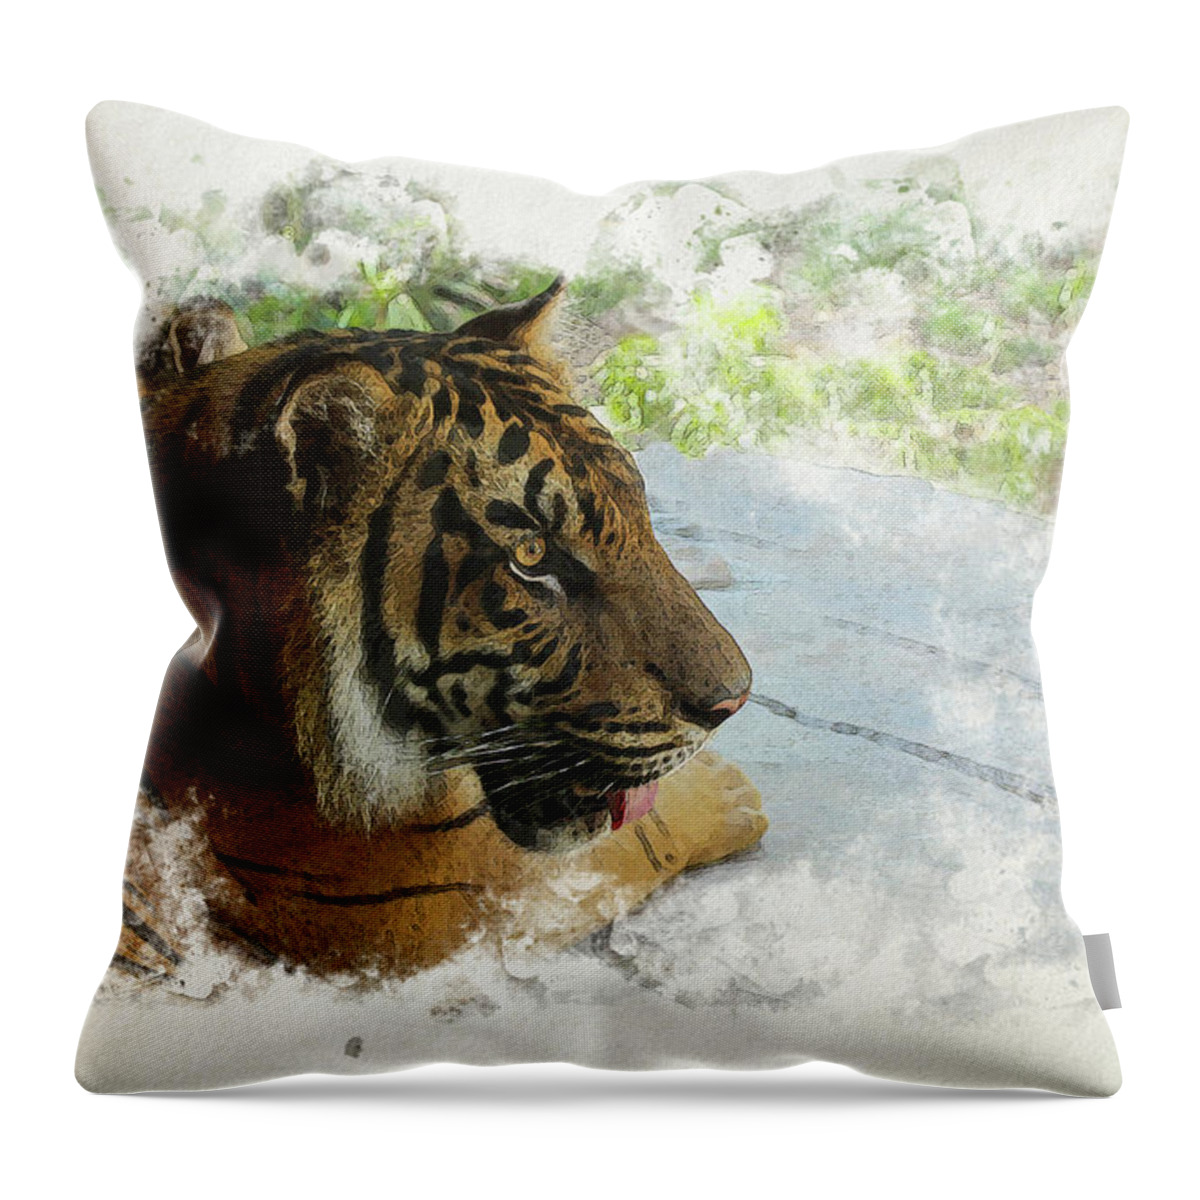 Tiger Throw Pillow featuring the digital art Tiger Portrait with Textures by Alison Frank